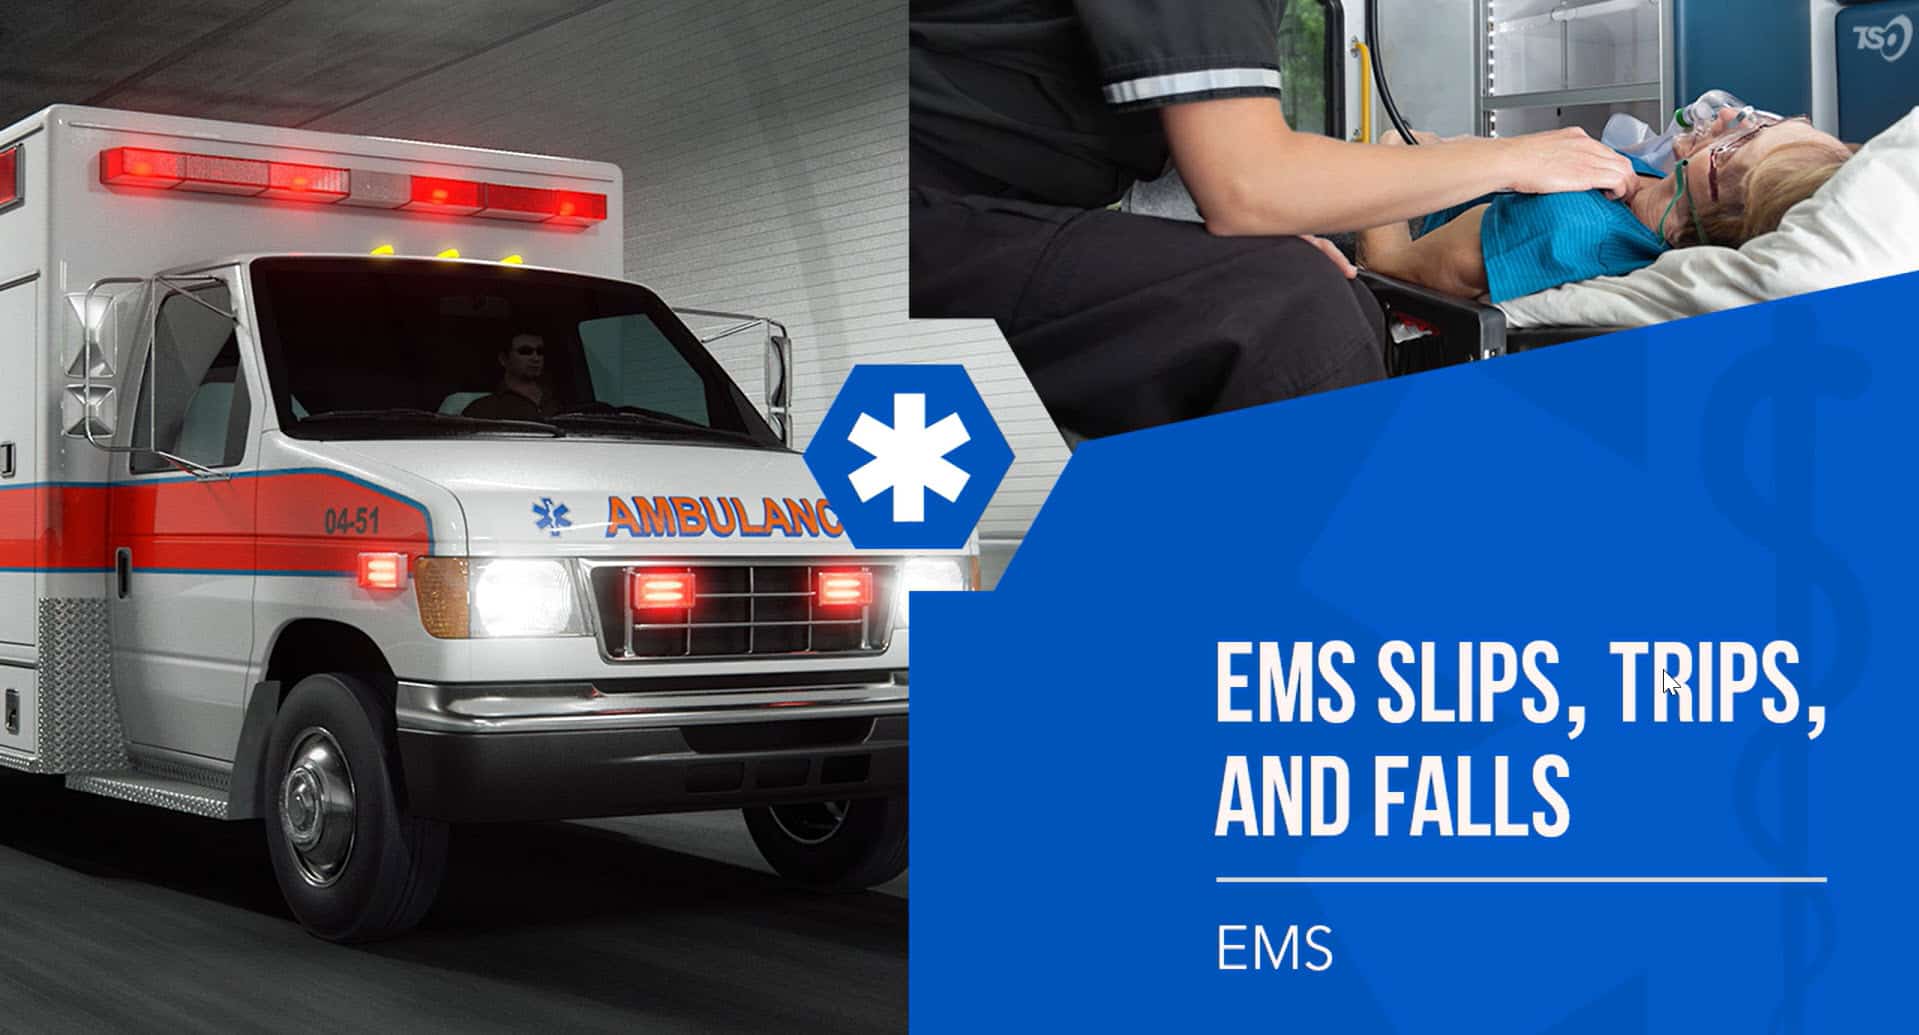 EMS Slips, Trips, and Falls online training course